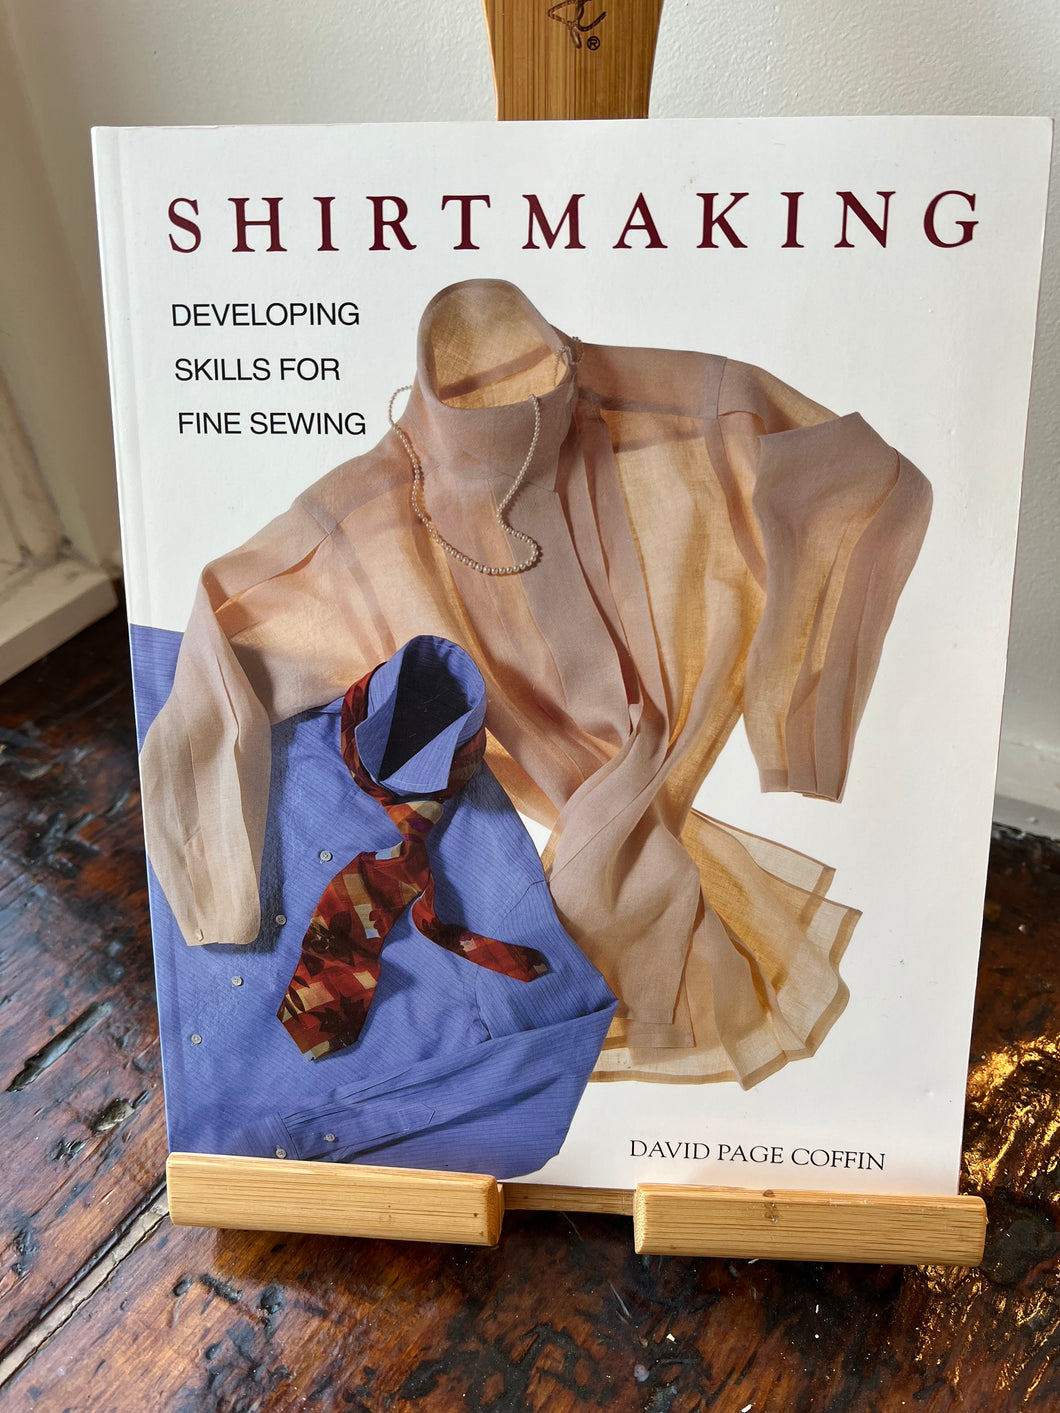 Shirtmaking by David Page Coffin - Softcover